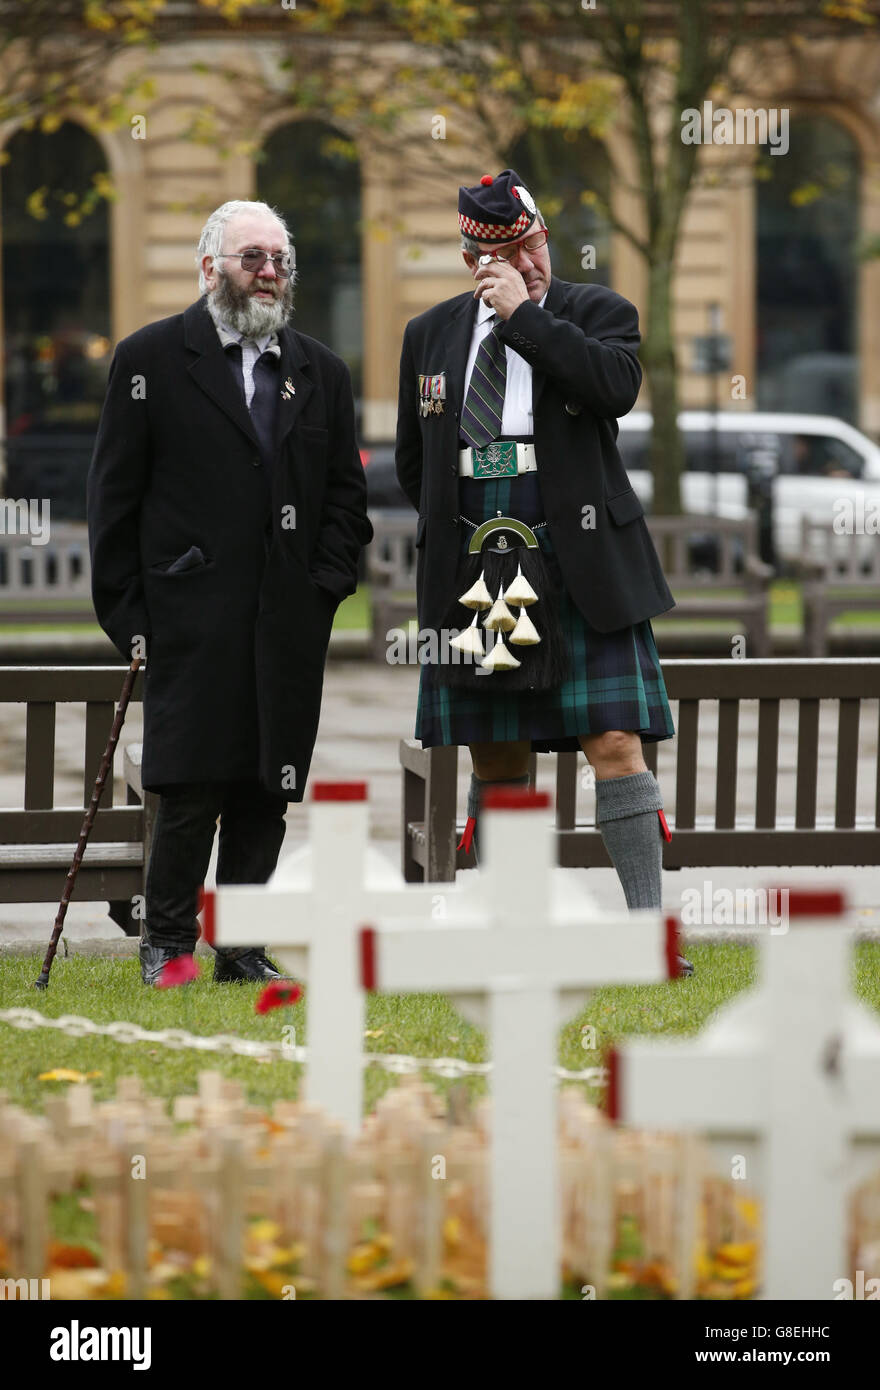 James McEwan (right), who served with the Argyll and Sutherland Highlanders, sheds a tear as he looks at the garden of remembrance in George Square, Glasgow, alongside Peter Ferguson, who lost his son in the Iraq conflict. Stock Photo